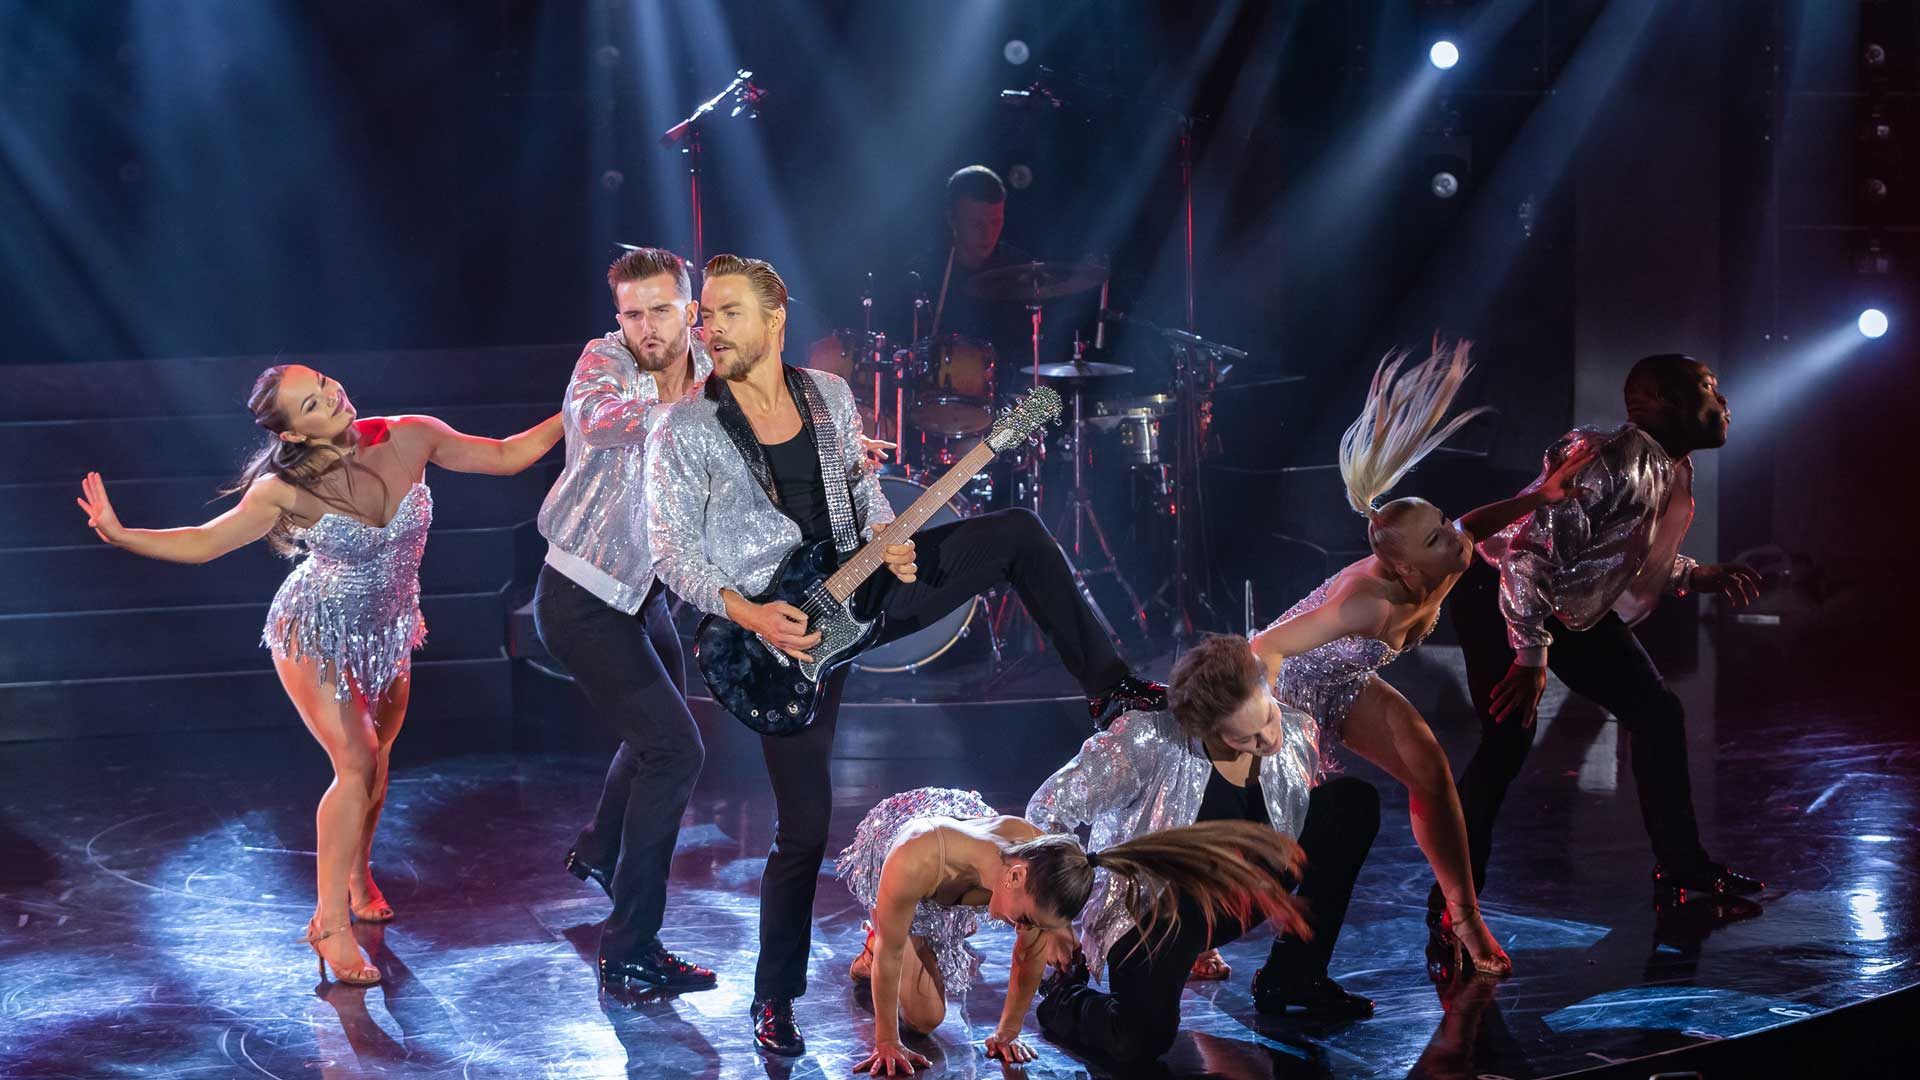 Derek Hough doesn’t just dance—he grabs the microphone and sings in this Las Vegas show!